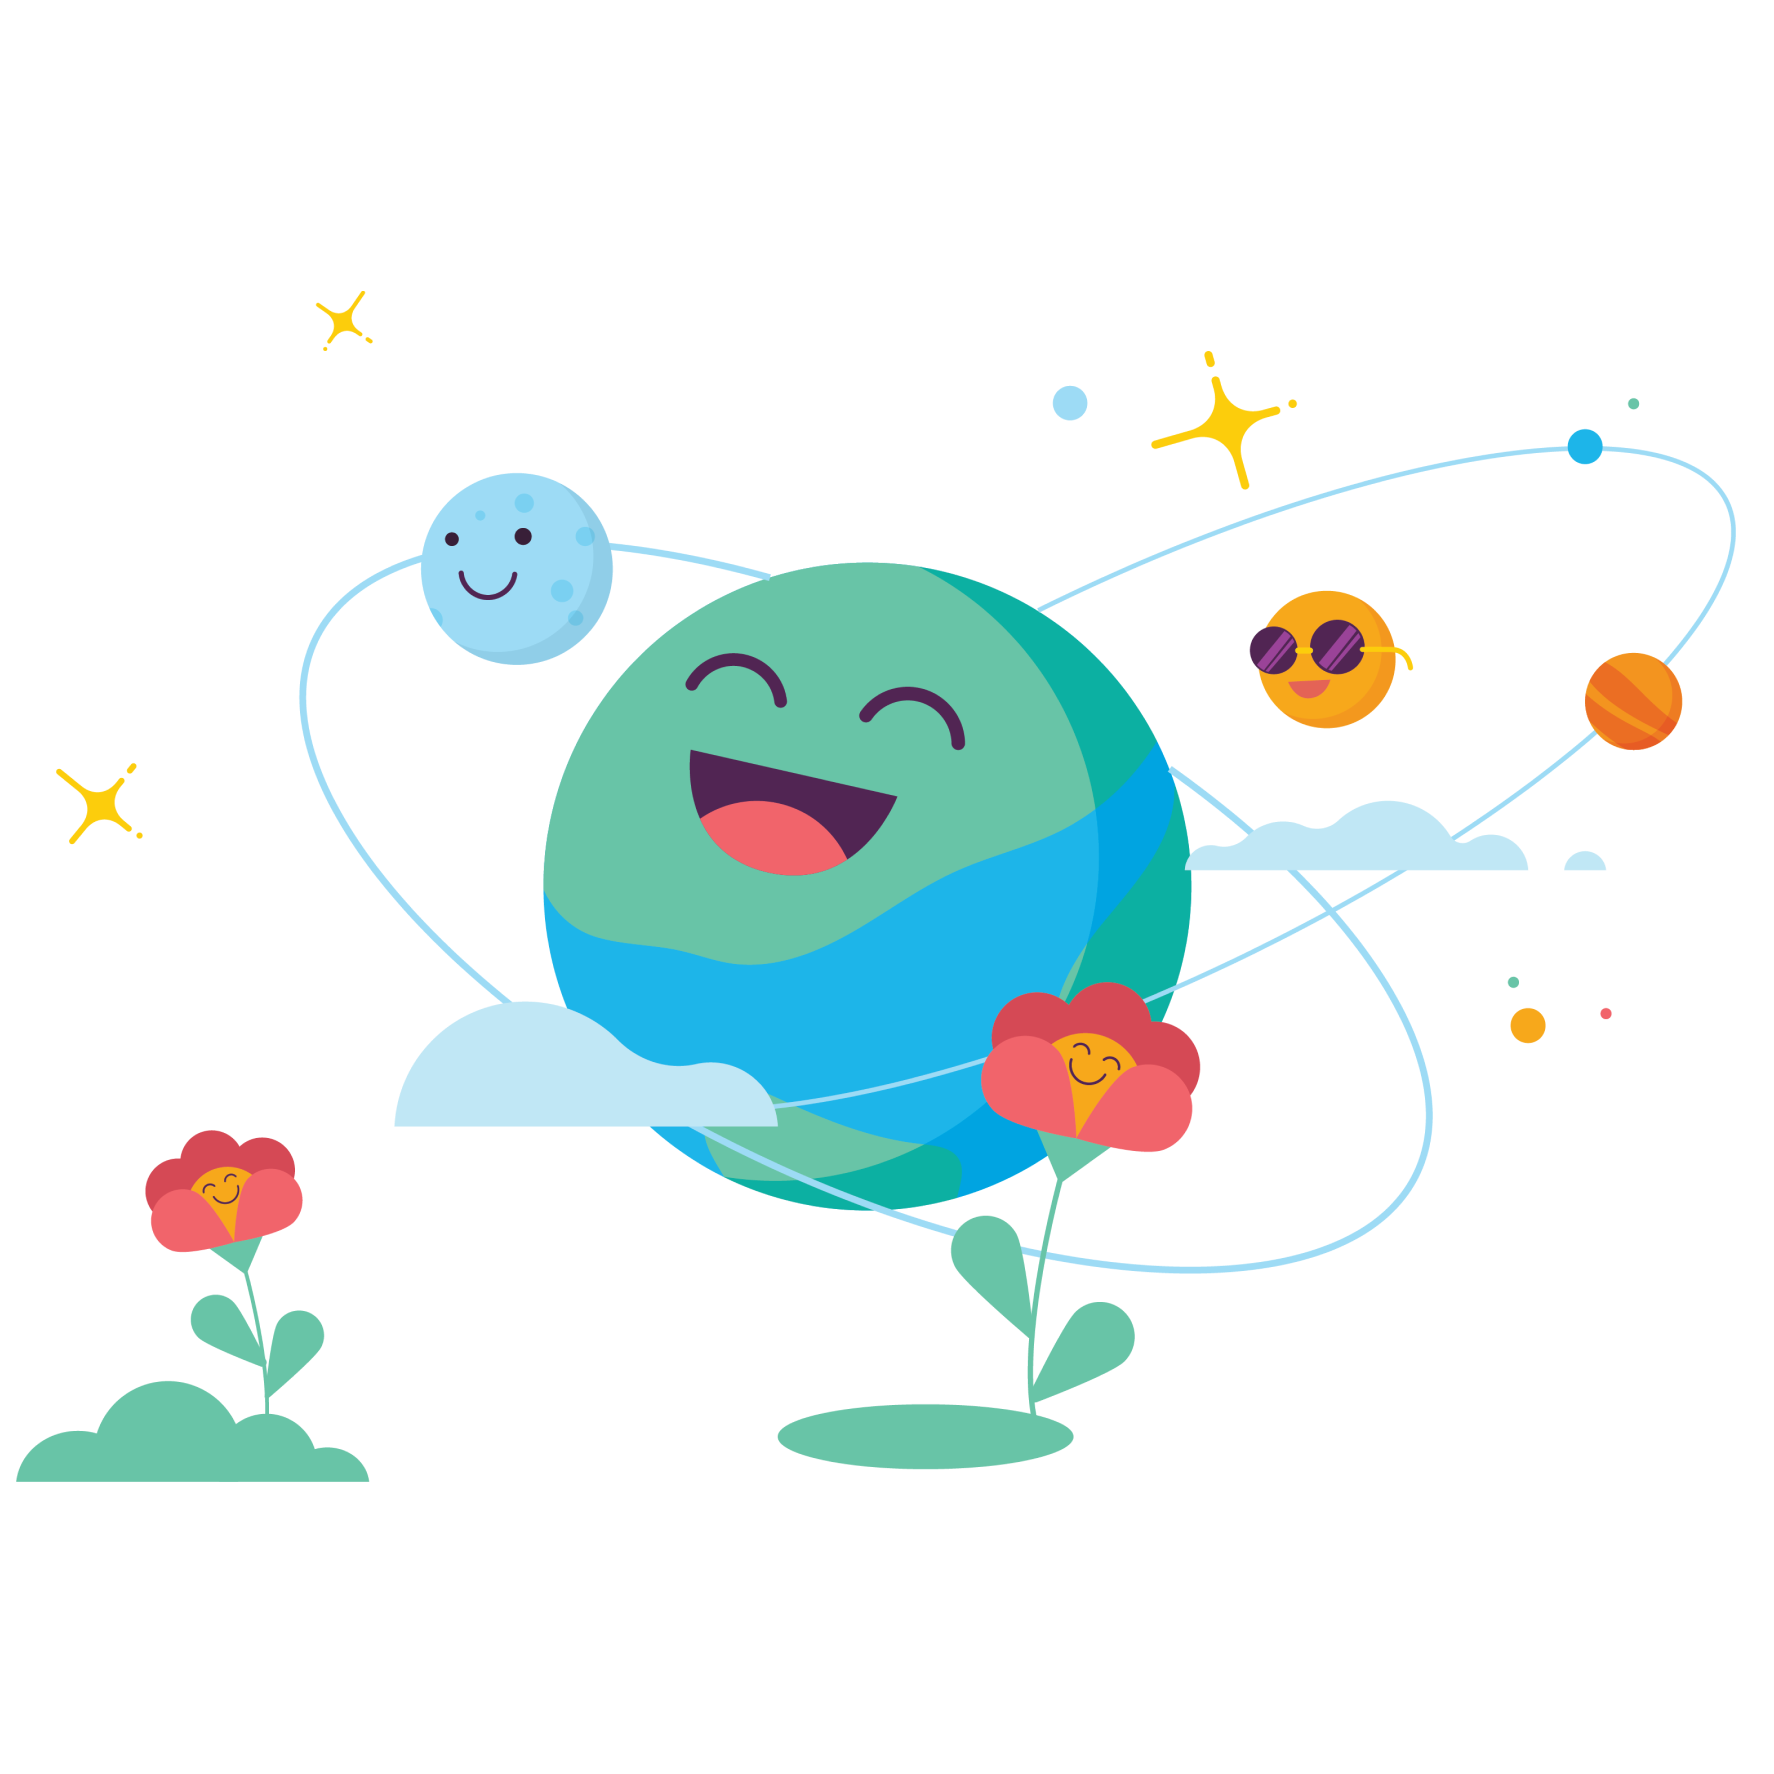 An illustration of flowers, the earth and planets, all with smiling faces.